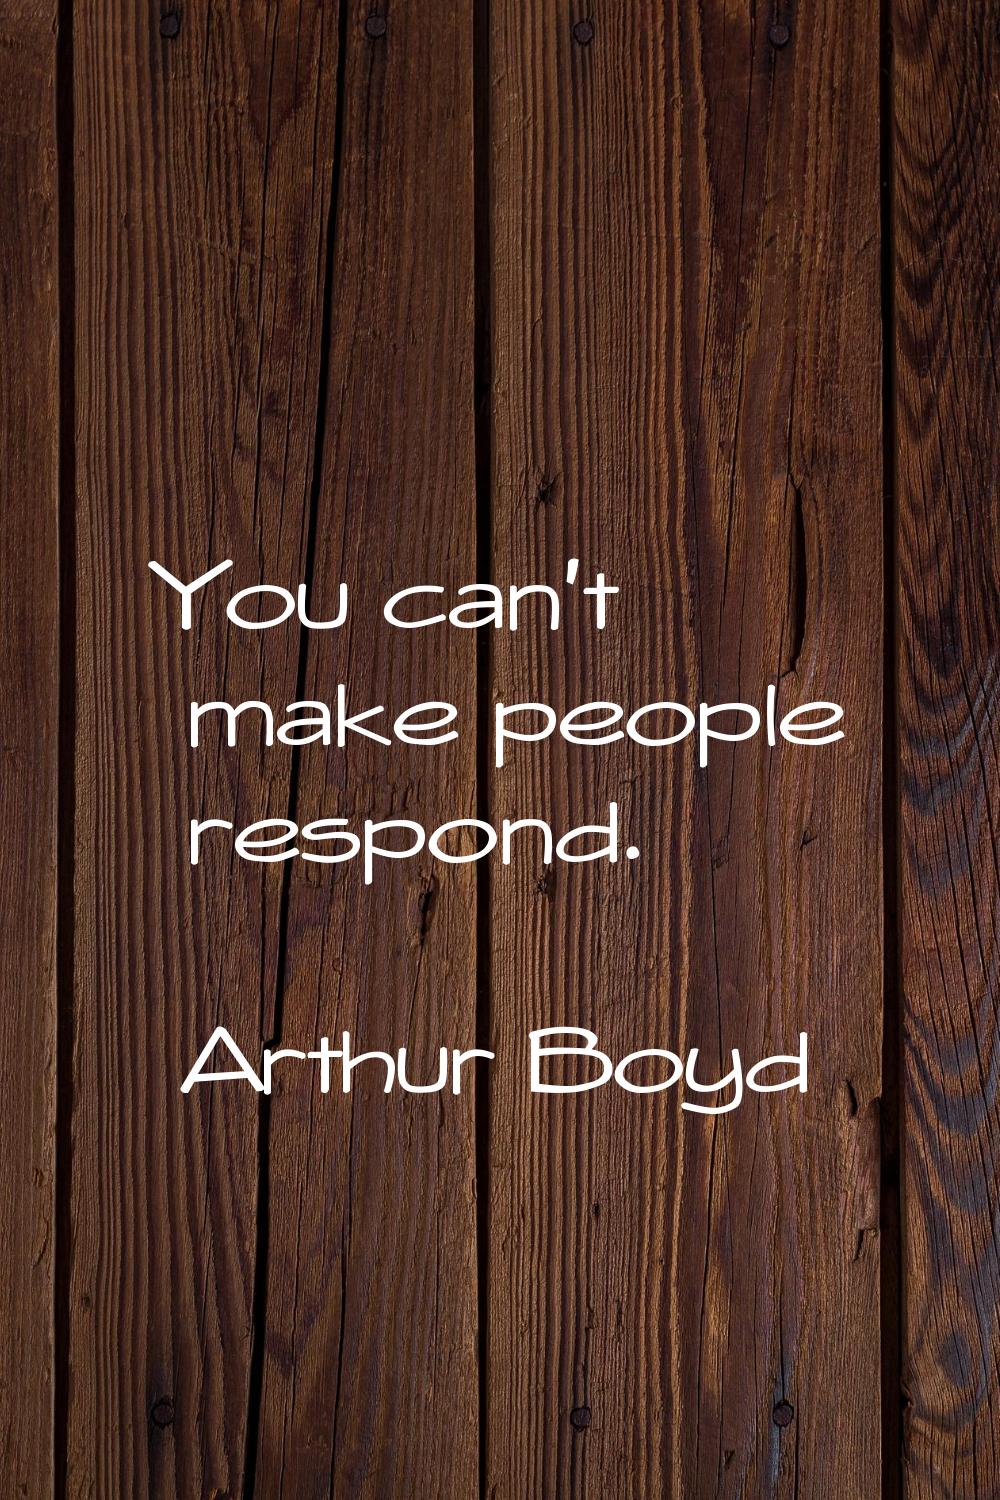 You can't make people respond.